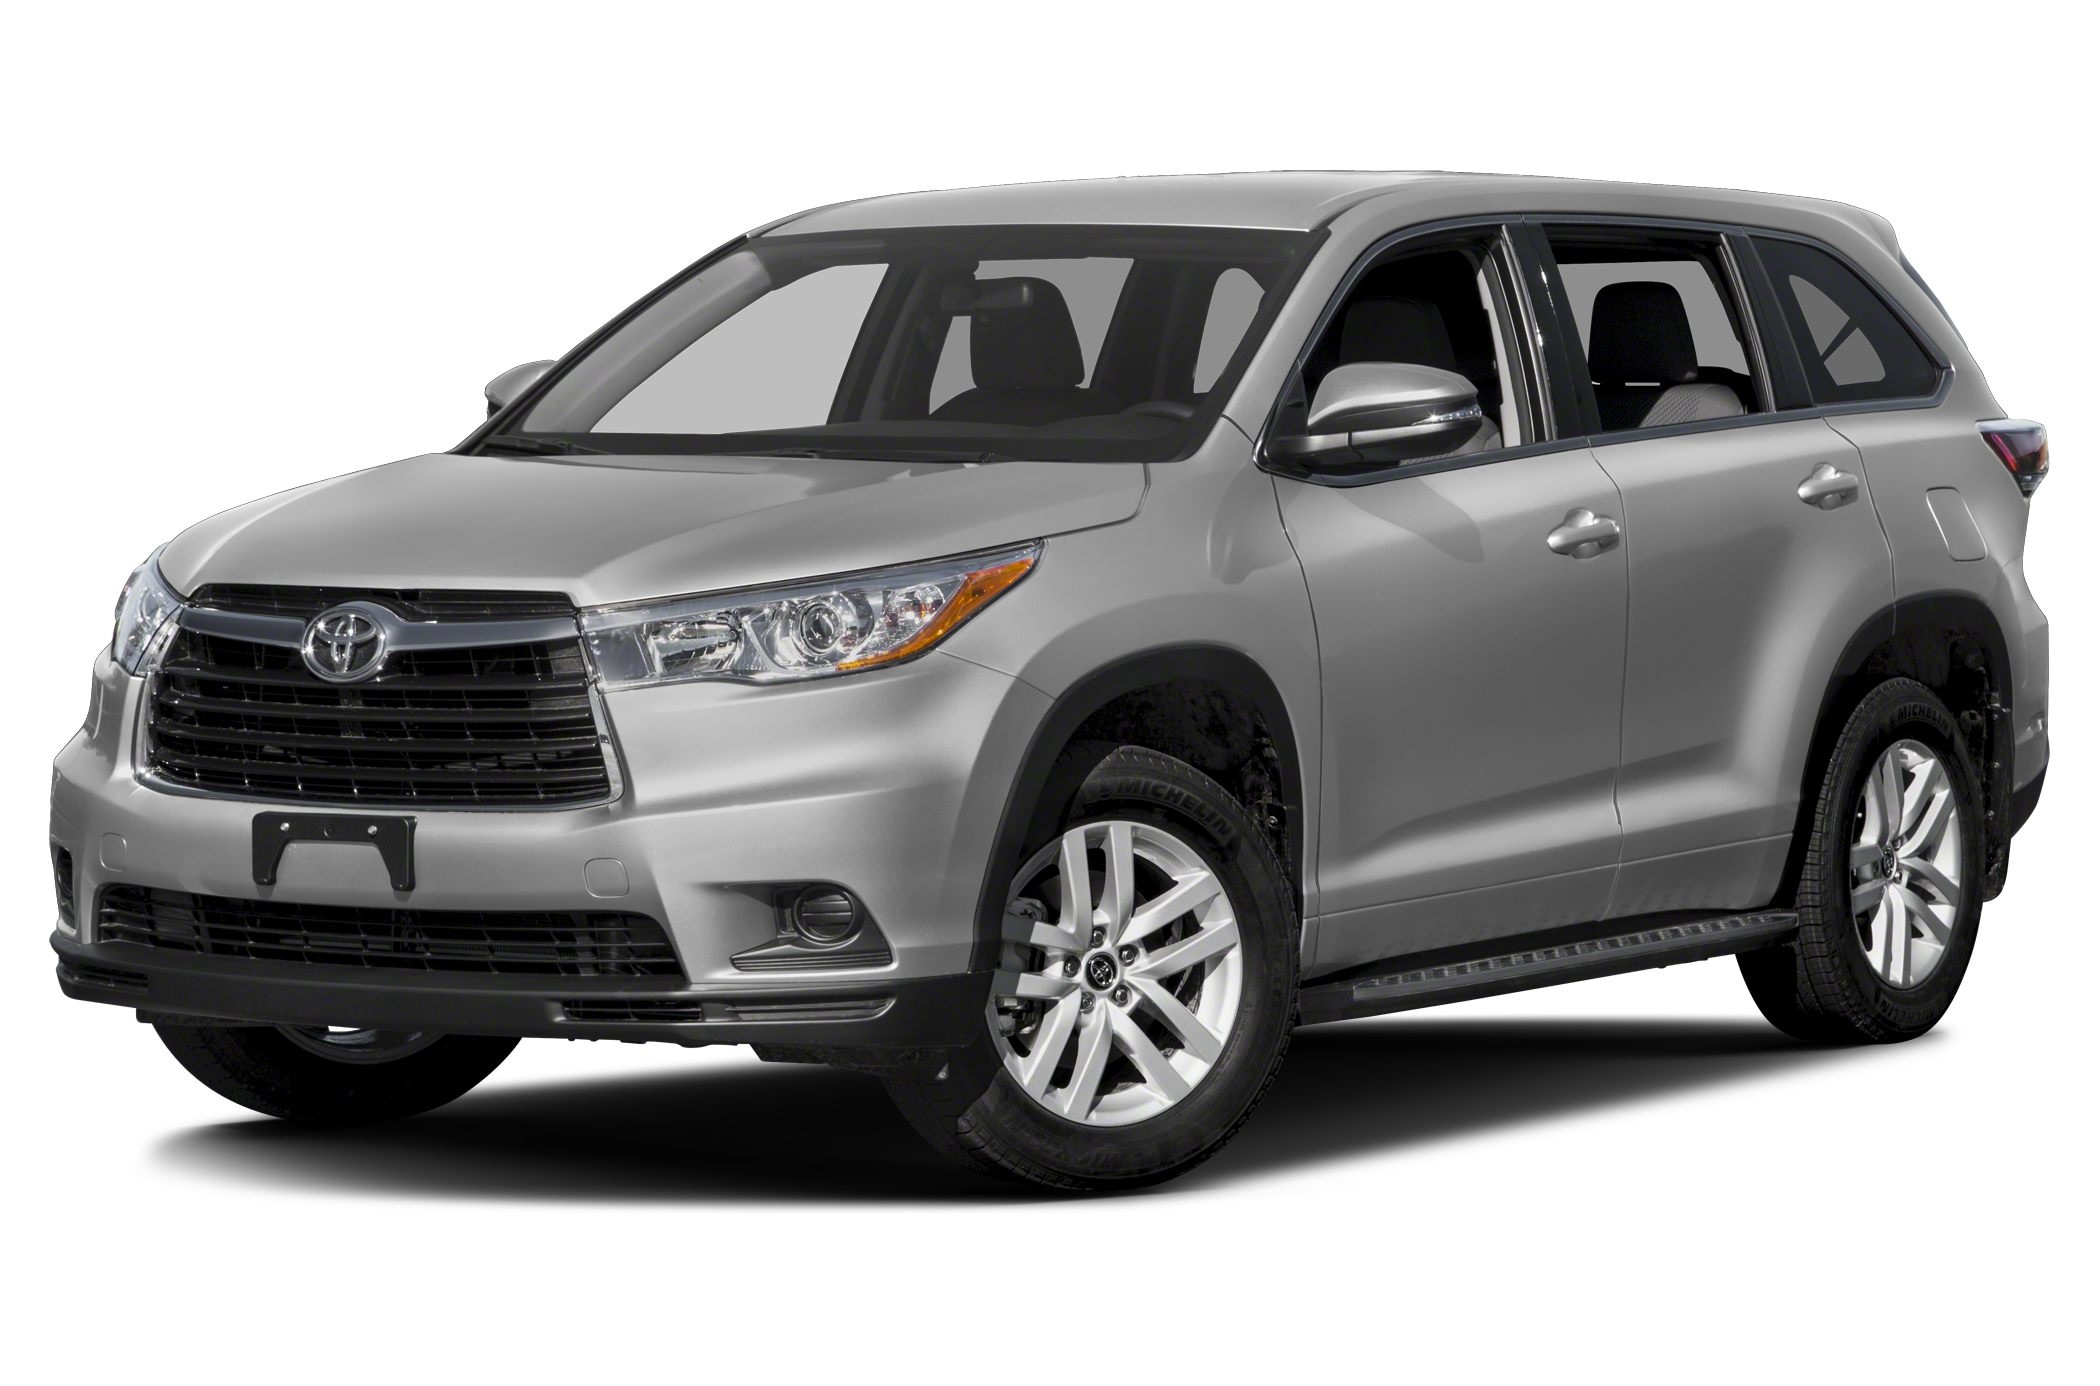 Toyota Highlander, Spacious and comfortable, Front-wheel drive, Reliable family SUV, 2100x1390 HD Desktop